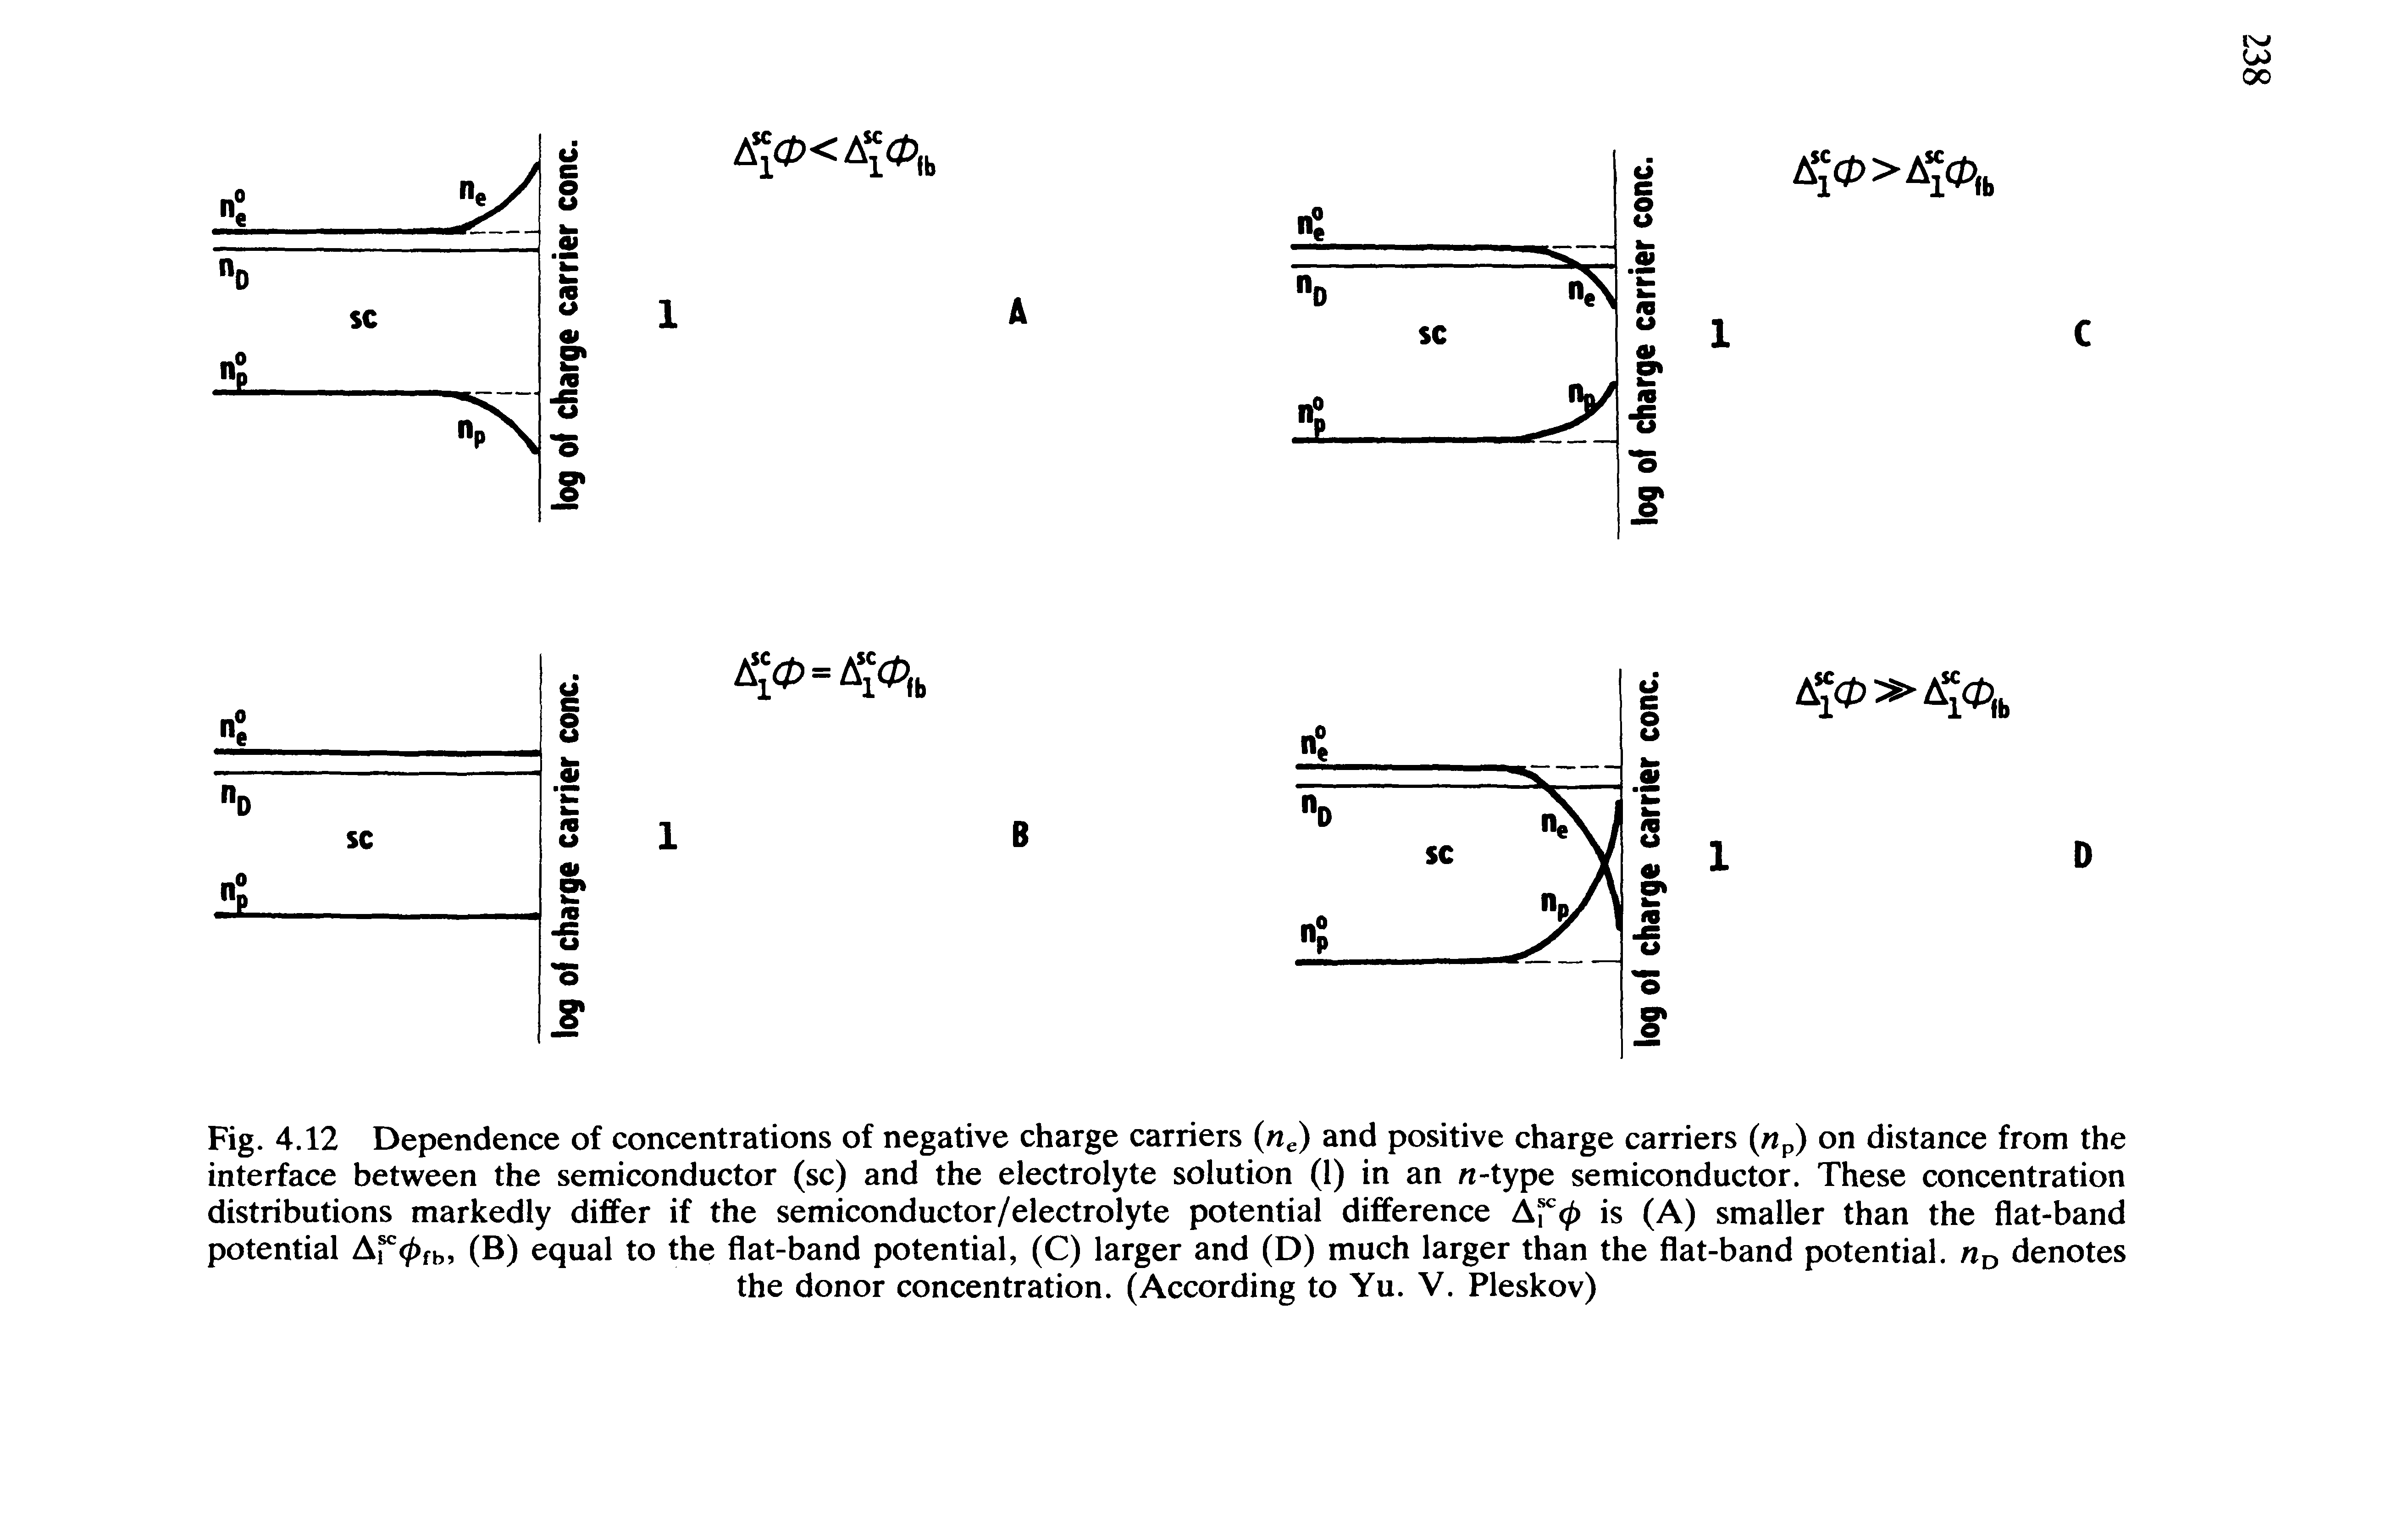 Fig. 4.12 Dependence of concentrations of negative charge carriers (ne) and positive charge carriers (np) on distance from the interface between the semiconductor (sc) and the electrolyte solution (1) in an w-type semiconductor. These concentration distributions markedly differ if the semiconductor/electrolyte potential difference A cp is (A) smaller than the flat-band potential AF<pfb, (B) equal to the flat-band potential, (C) larger and (D) much larger than the flat-band potential. nD denotes...